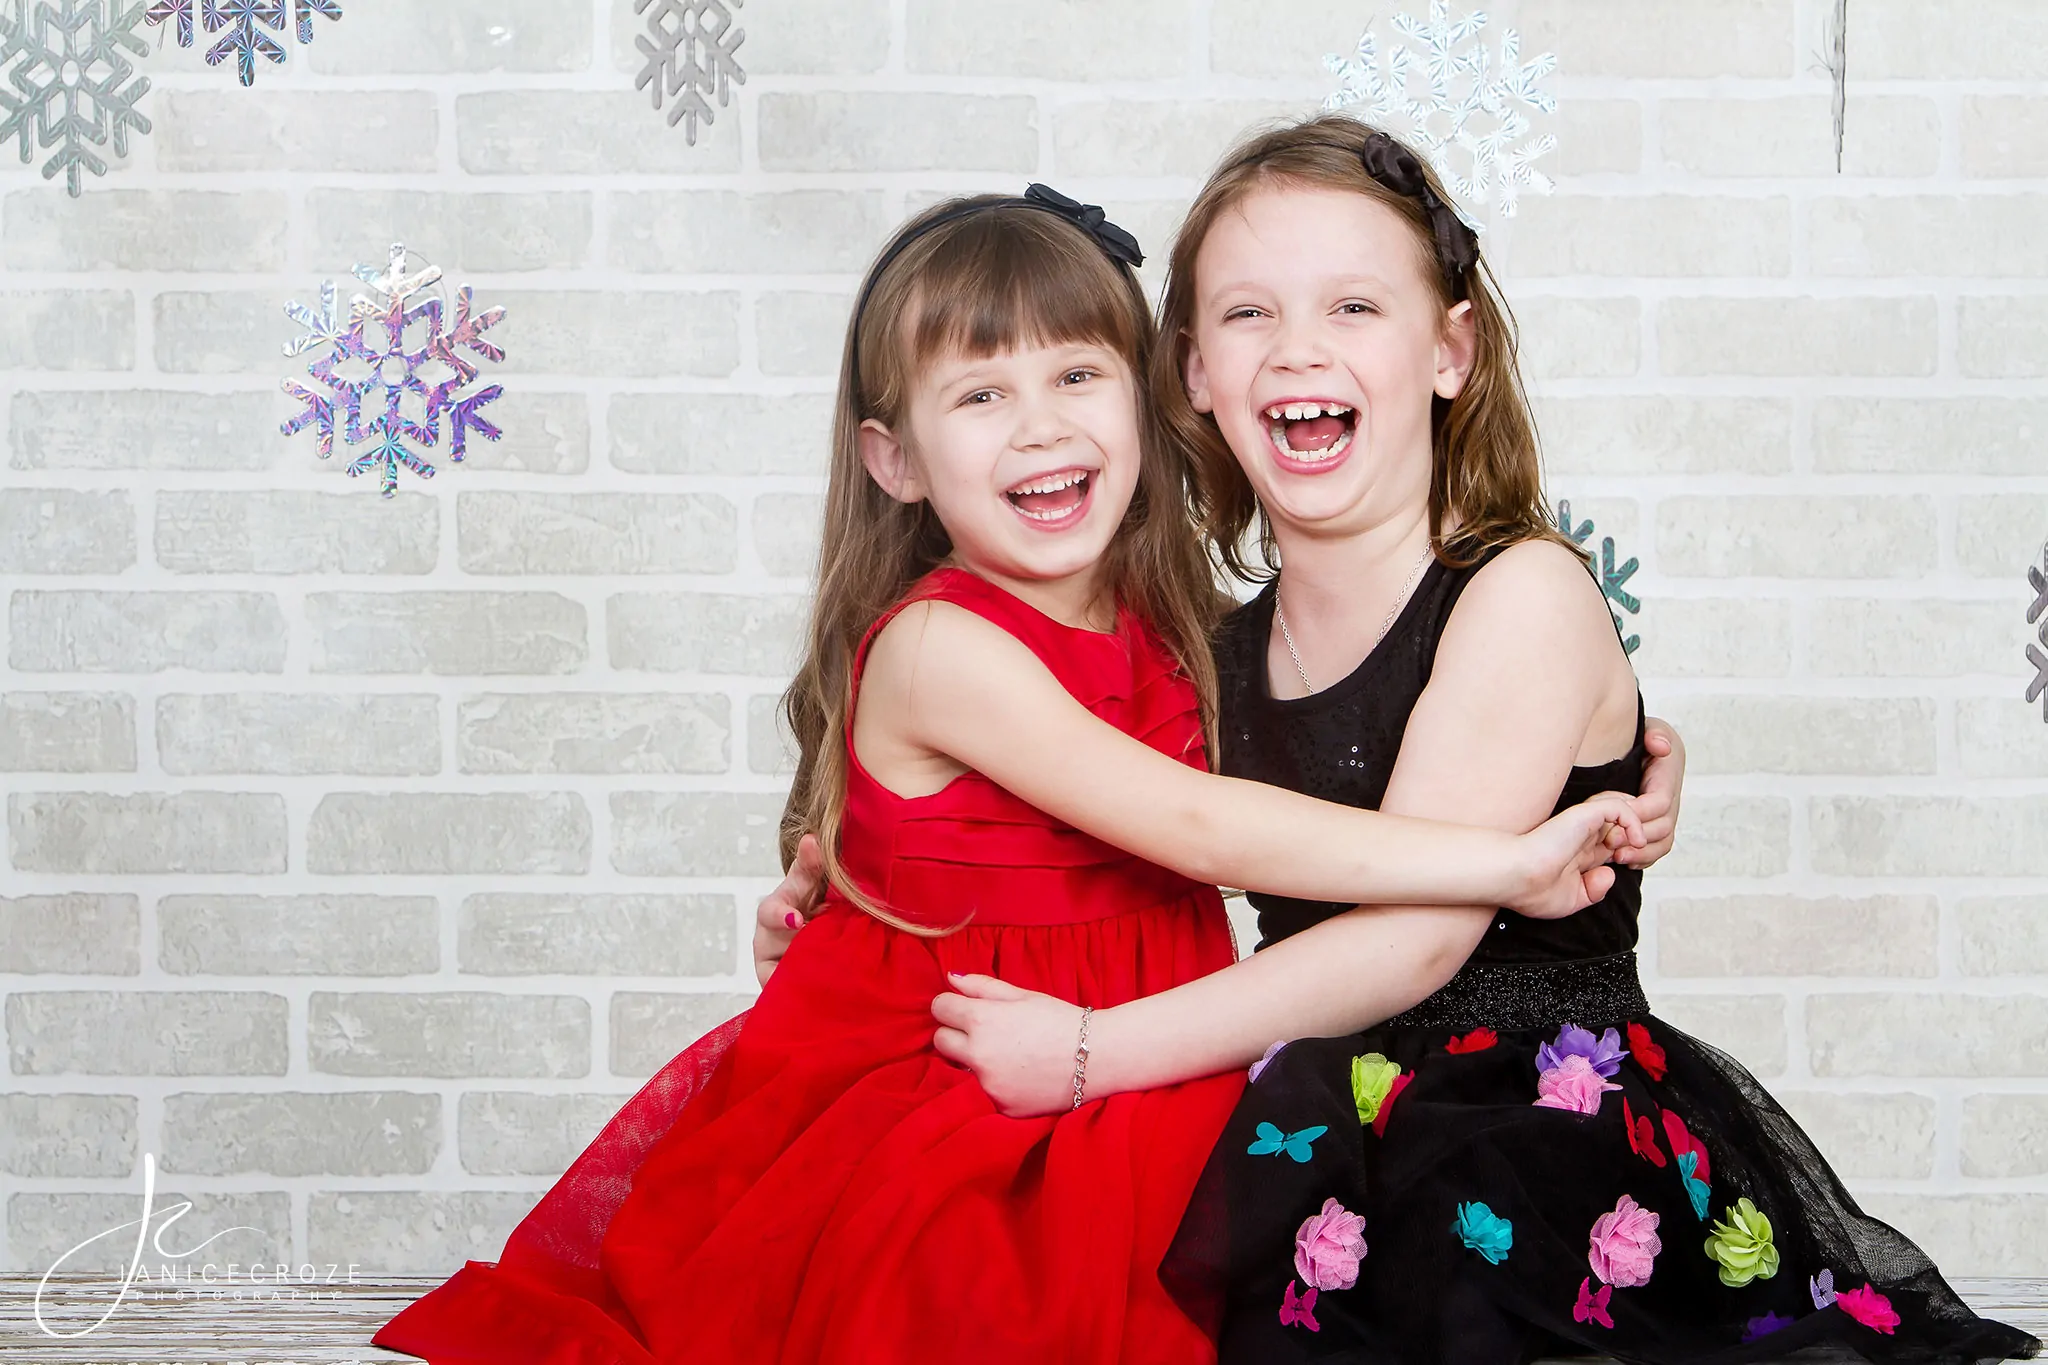 tips for a fun family holiday photo shoot